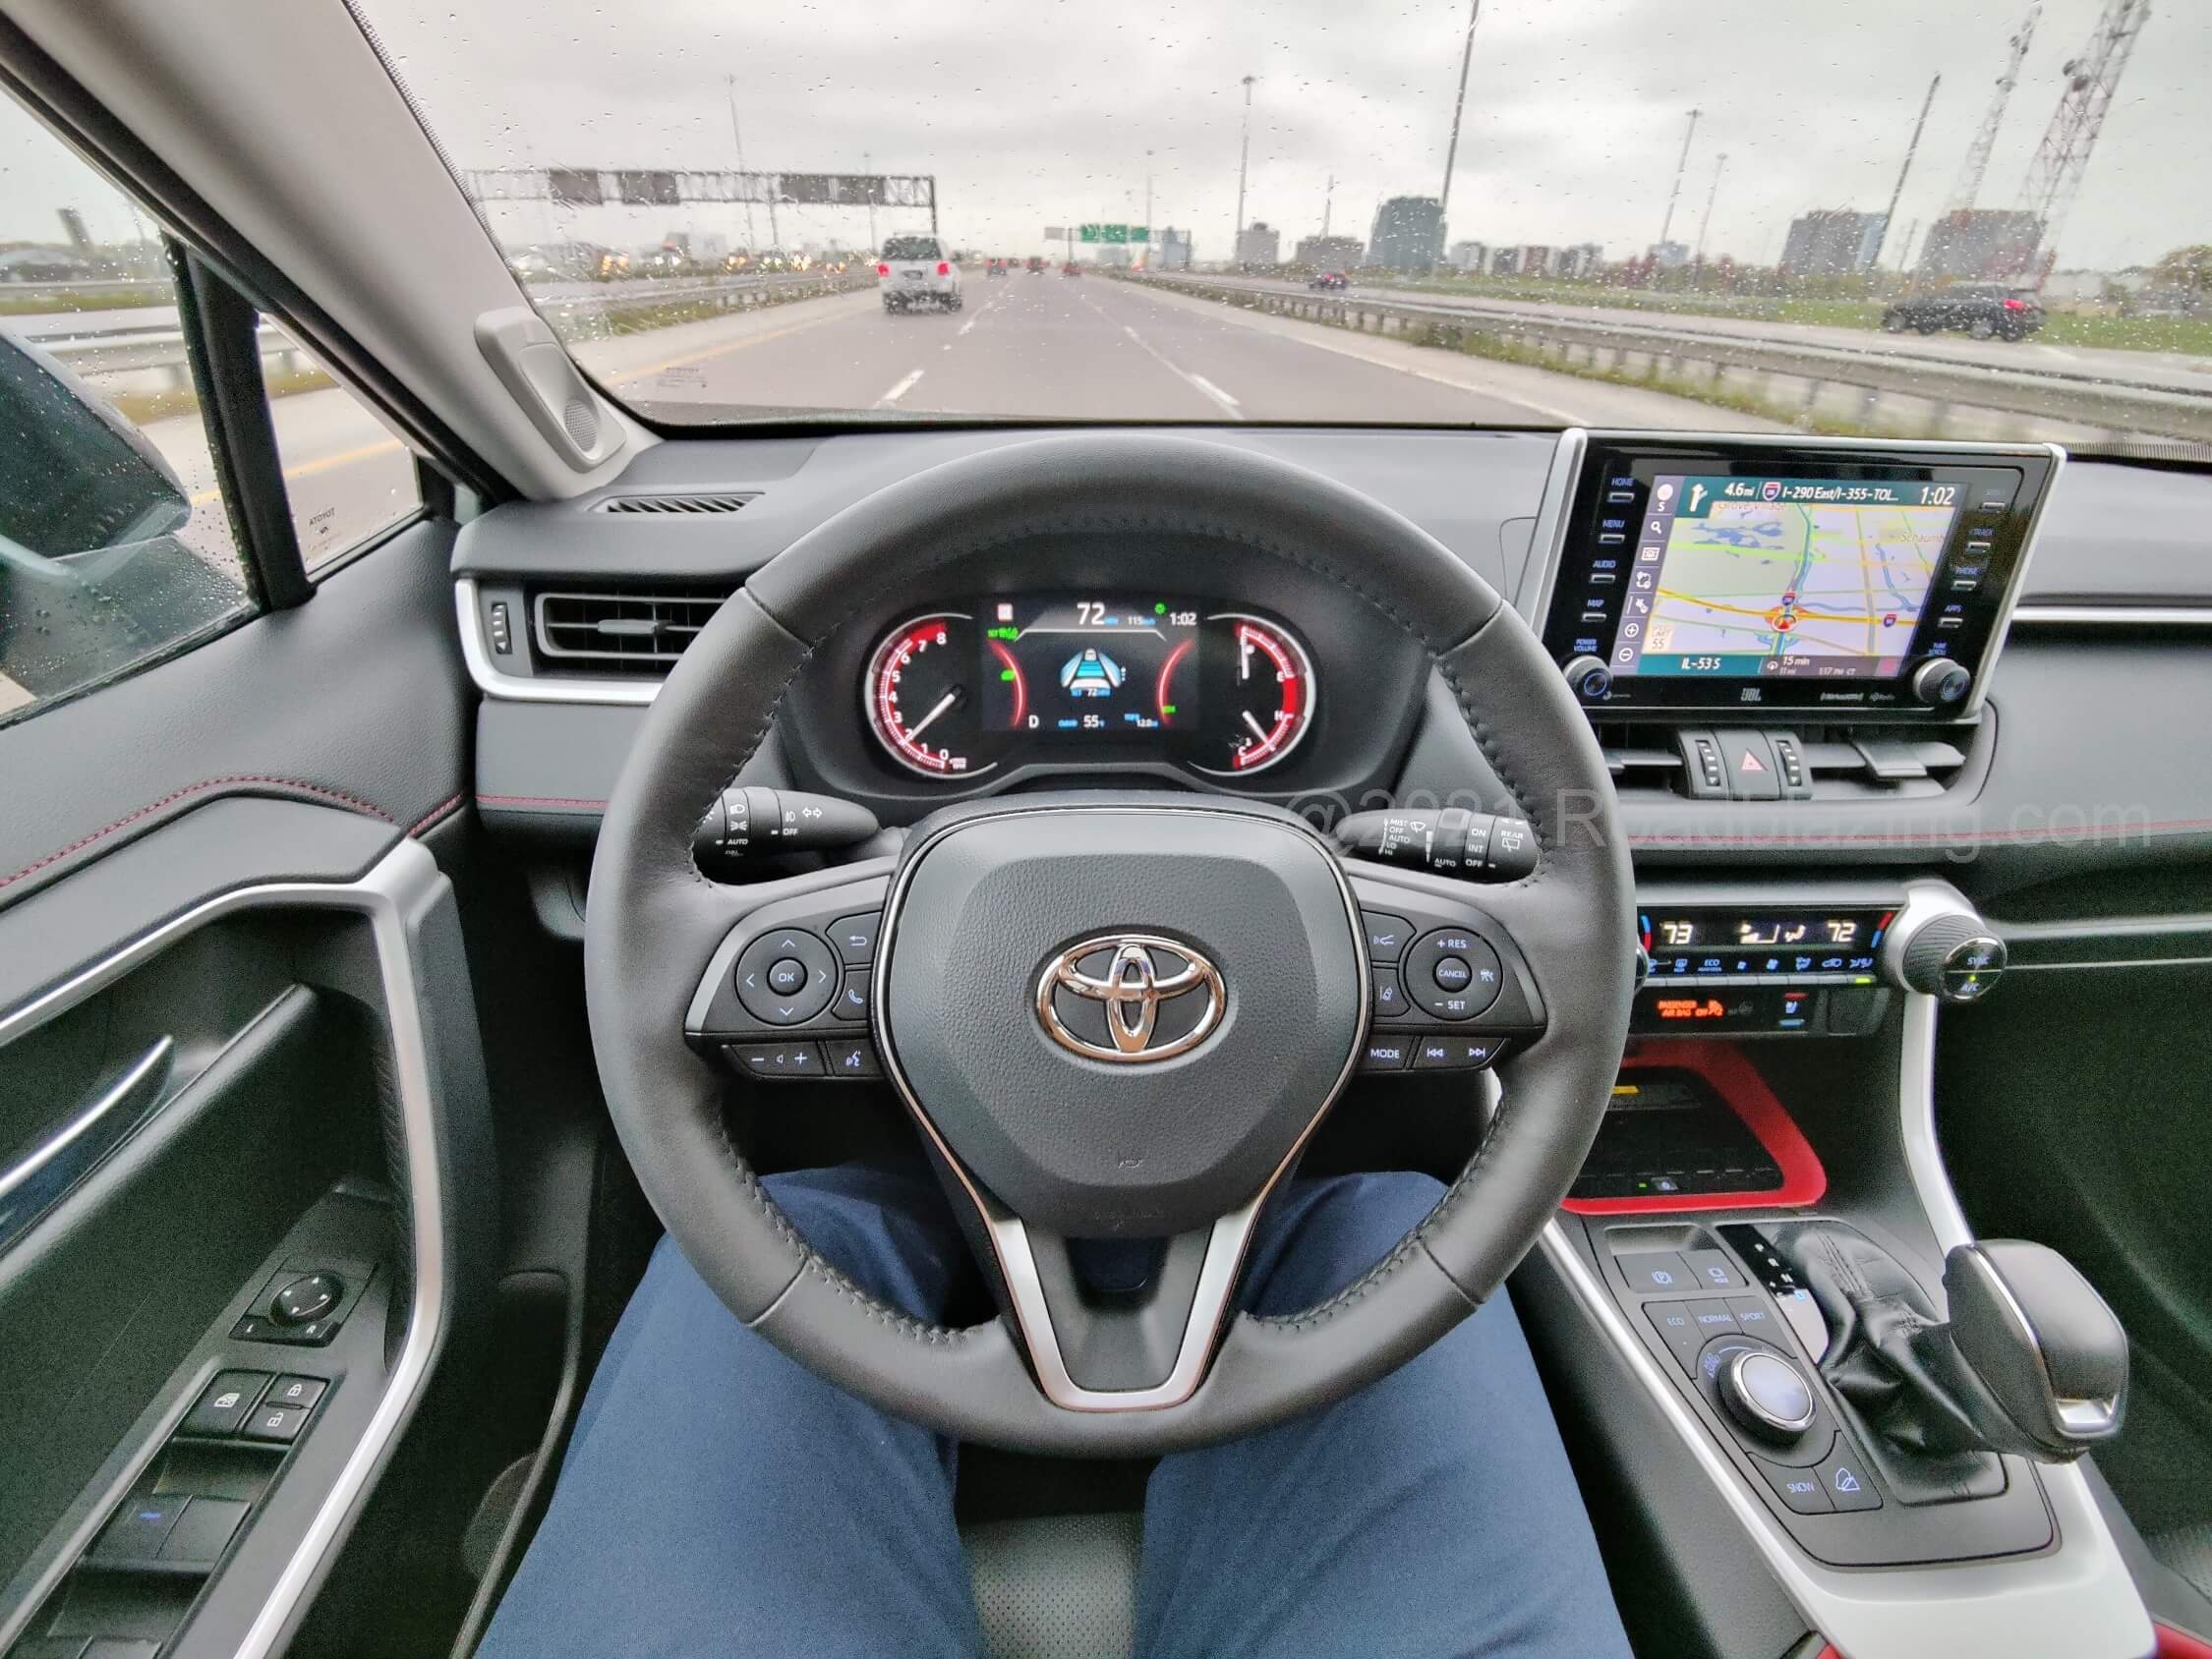 2021 Toyota RAV4 TRD Off Road: available 8.0" tri-pane infotainment touch LCD display w/ cloud native navigation